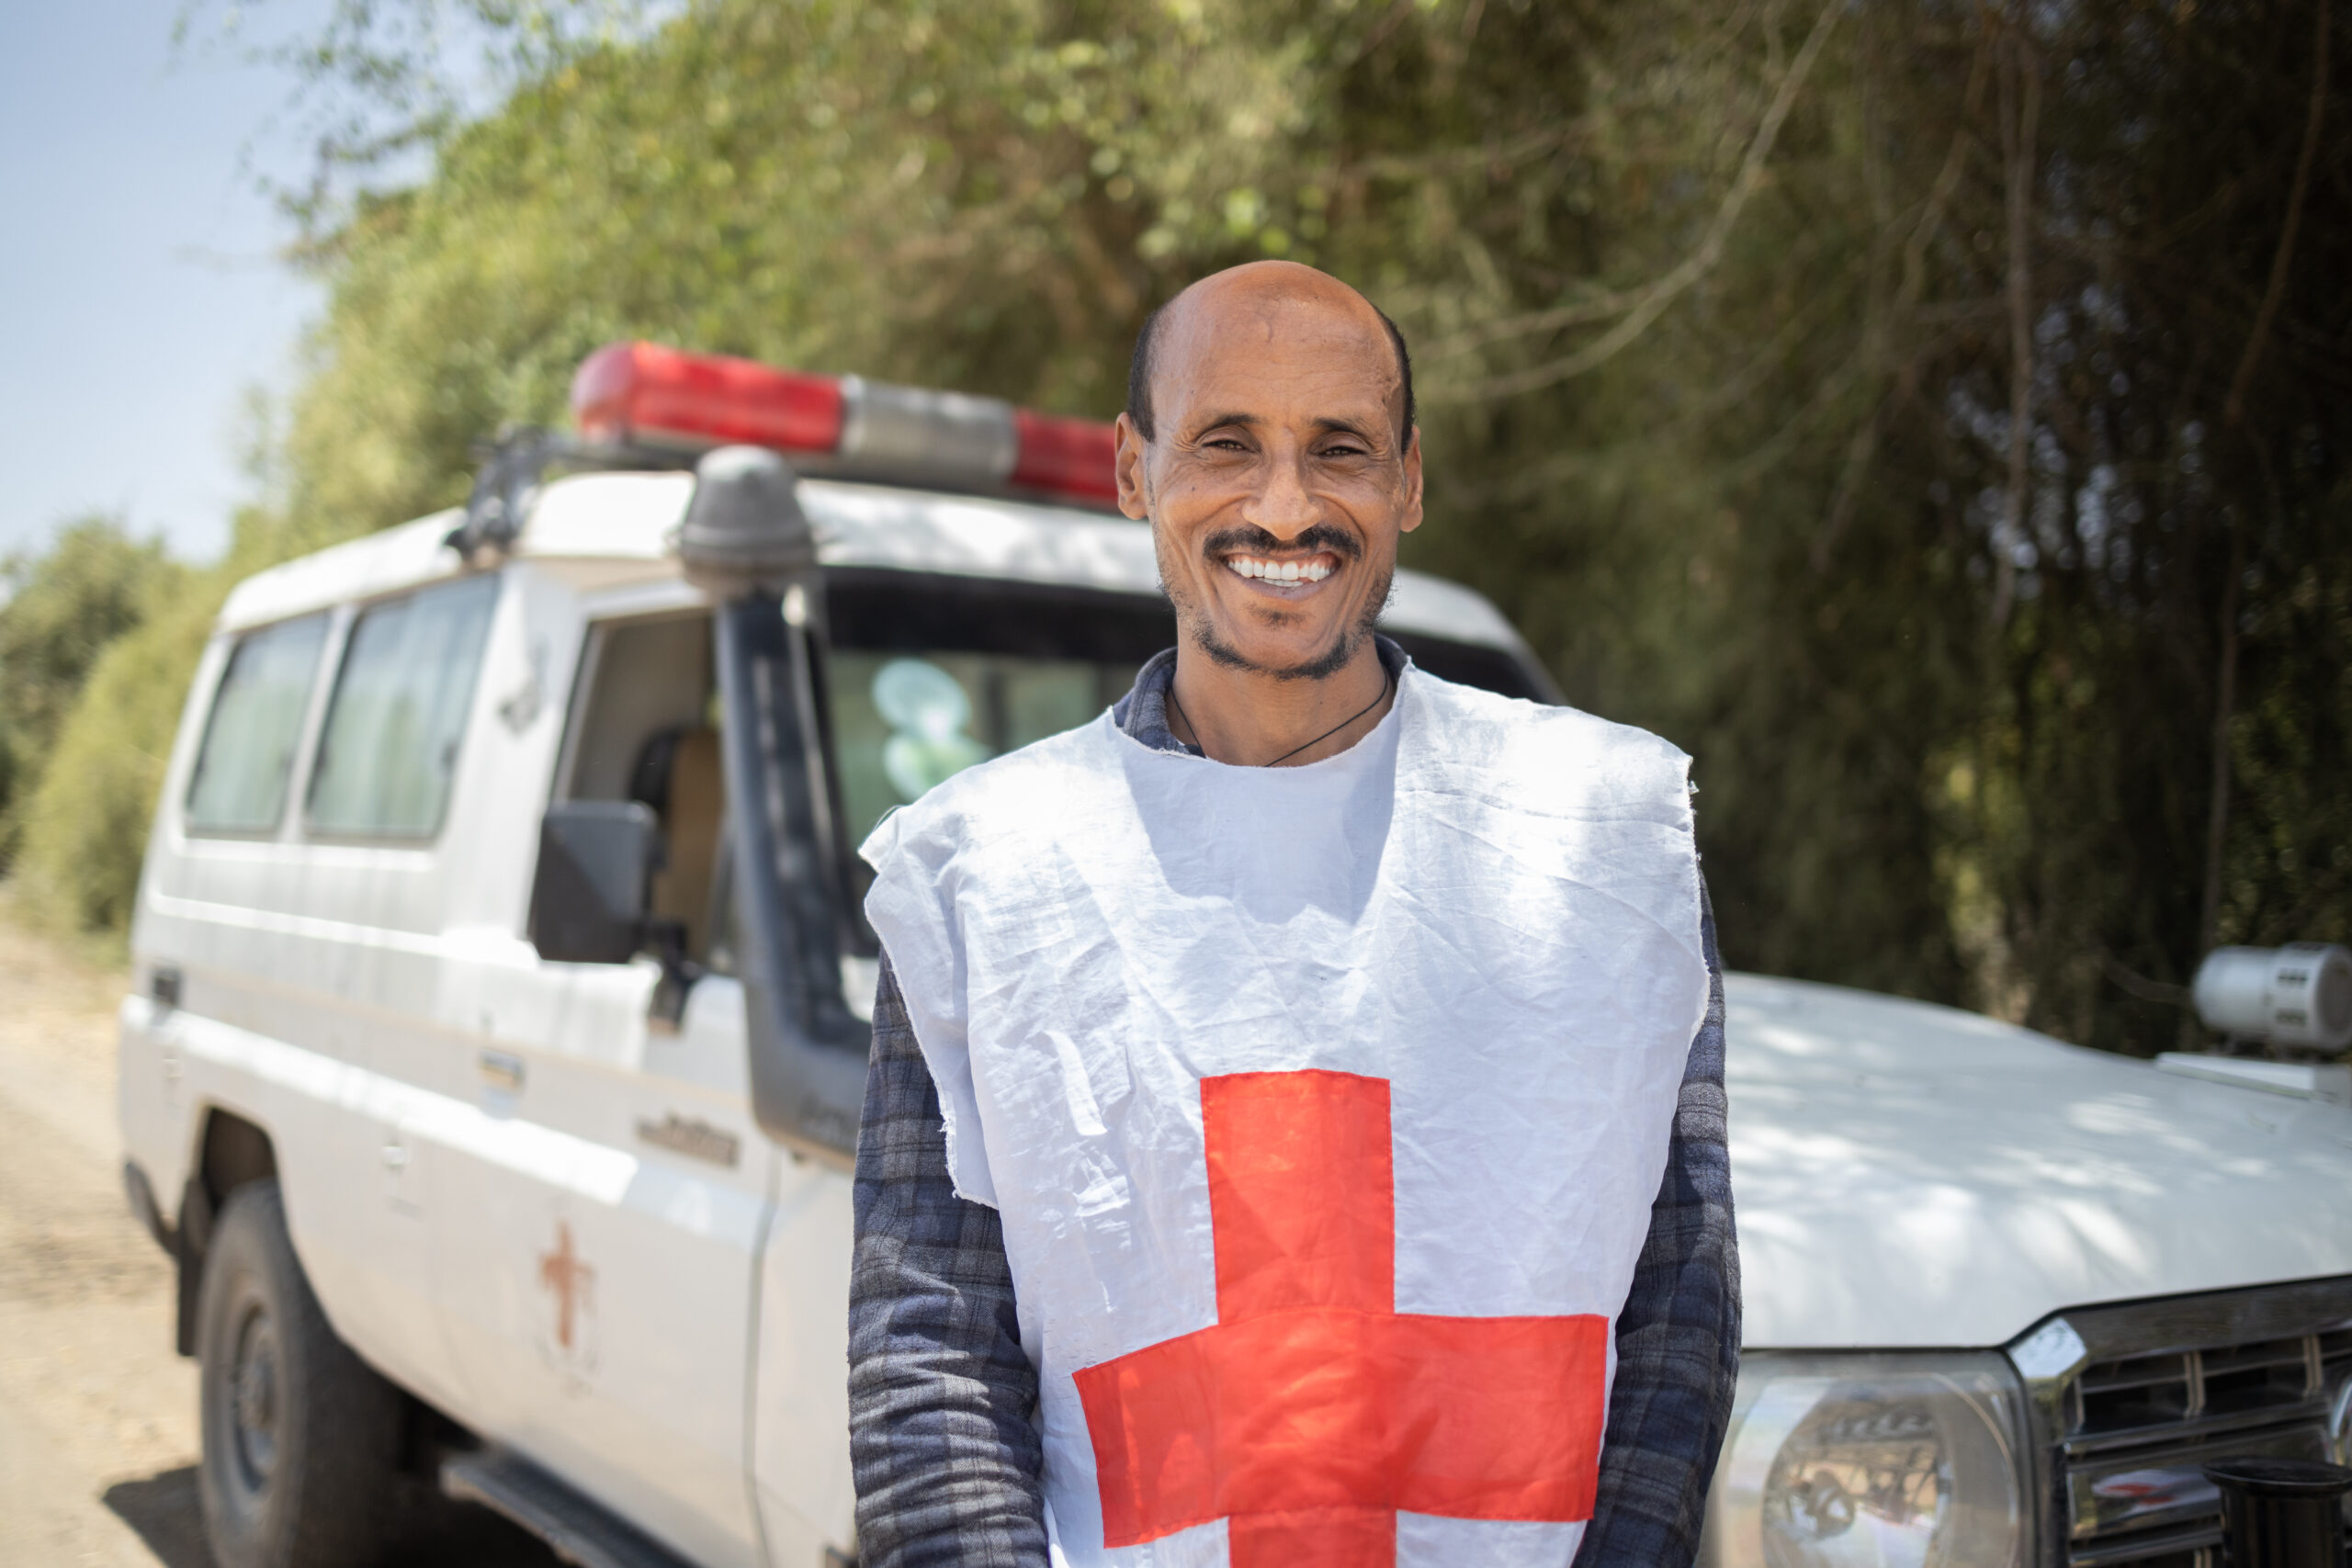 Date:16-APR-2021
Place: Kobo
Ambulance drivers/volunteers from Kobo helped out during the fighting in TIgray by transporting and treating wounded people.